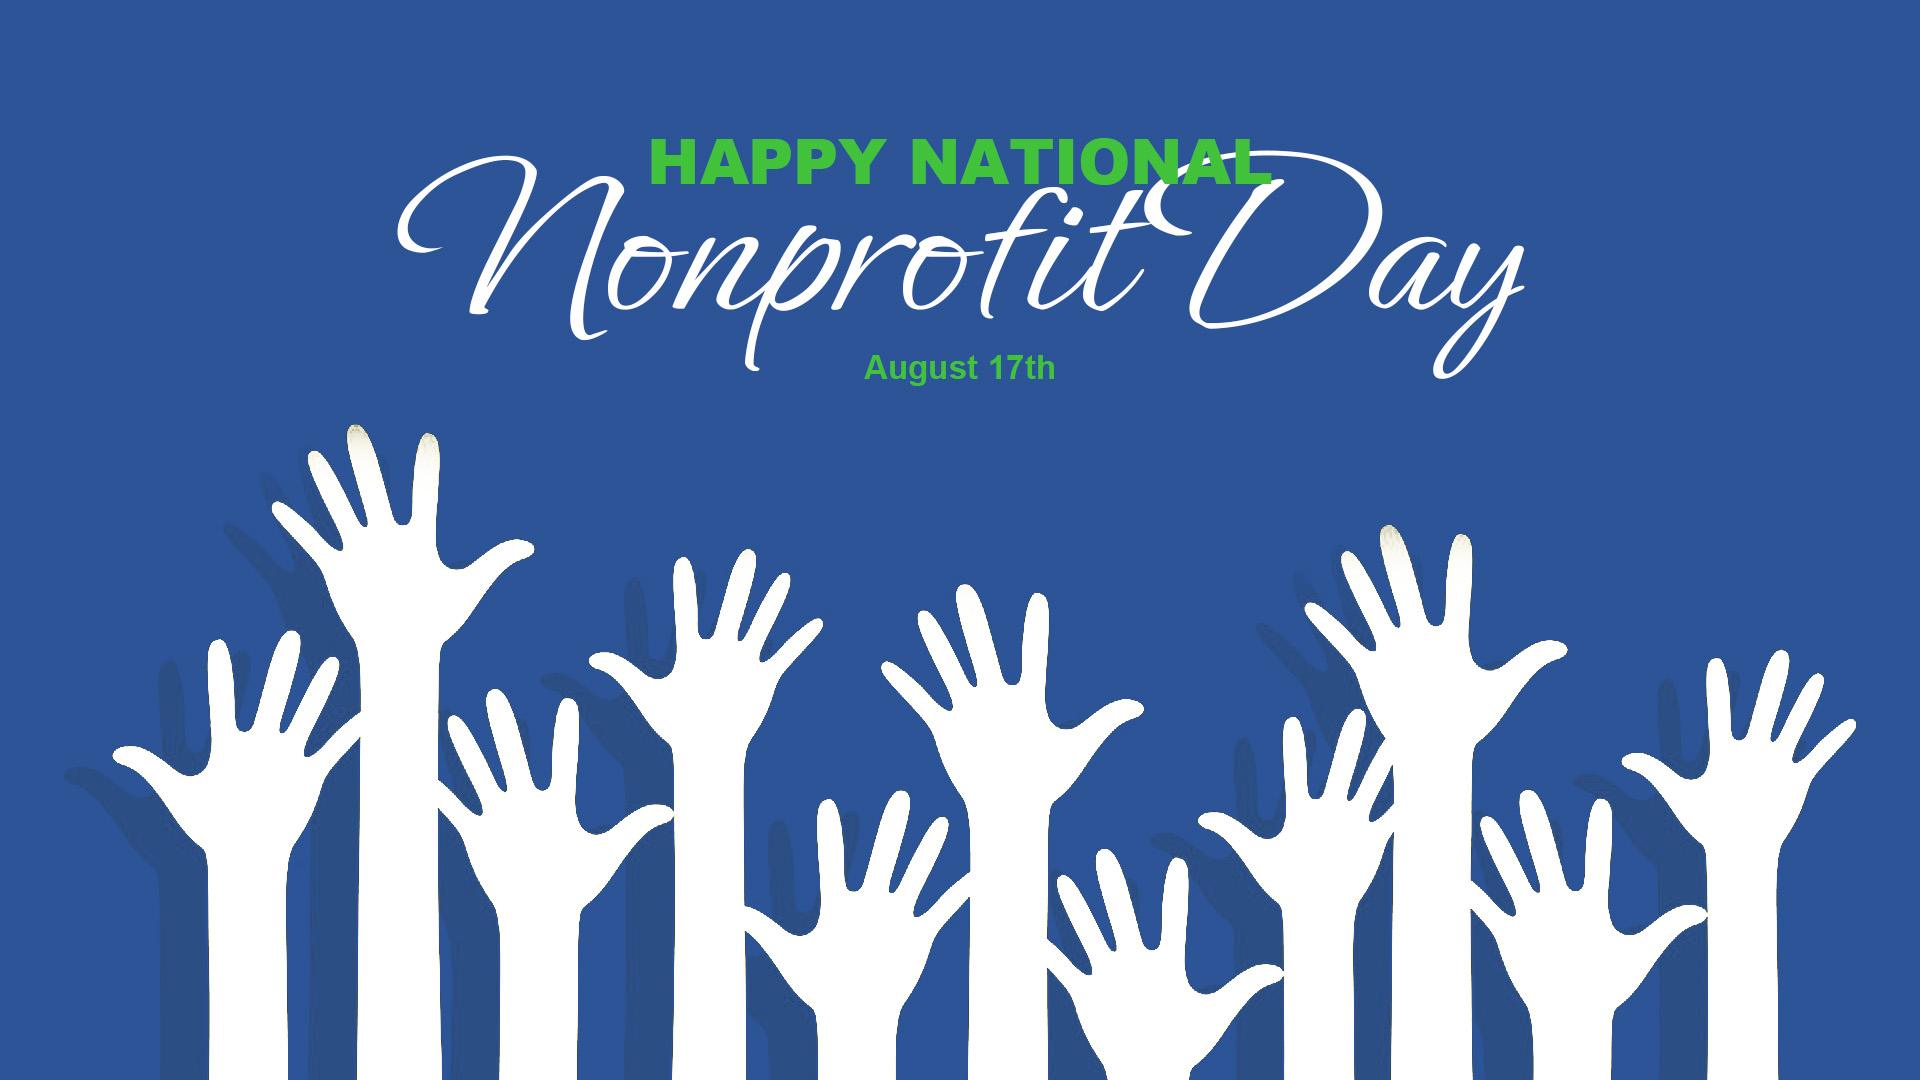 This graphic has a blue background with eleven different silhouettes of white hands reaching up from the bottom of the graphic. Across the top middle of the Image it reads Happy National Nonprofit Day August 17th. Happy National is written in a bold green font. Right below it Nonprofit Day is spelt out in a white cursive font. August 17th is written below it in a green font.